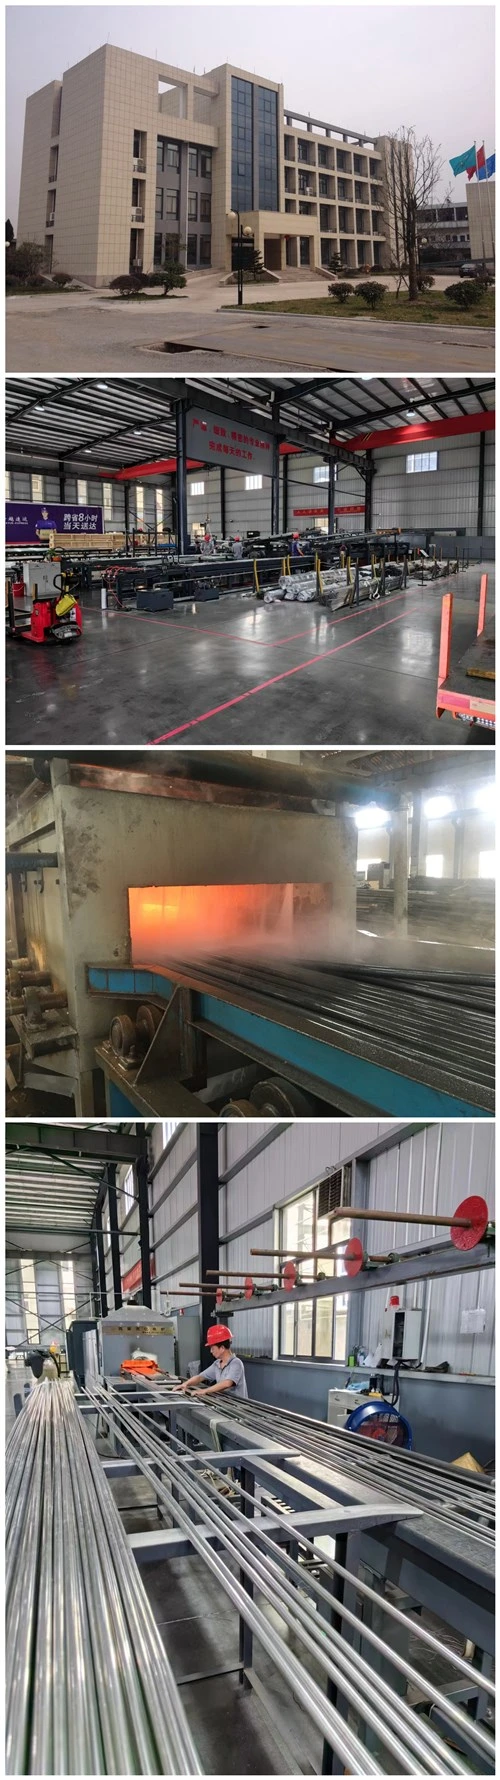 Stainless Steel Seamless Hastelloy X N06002 Pipe and Tube Alloy X Seamless Pipe Welded Pipe Precision Tube Monel 400 Inconel 600 C22 N02200 Plate